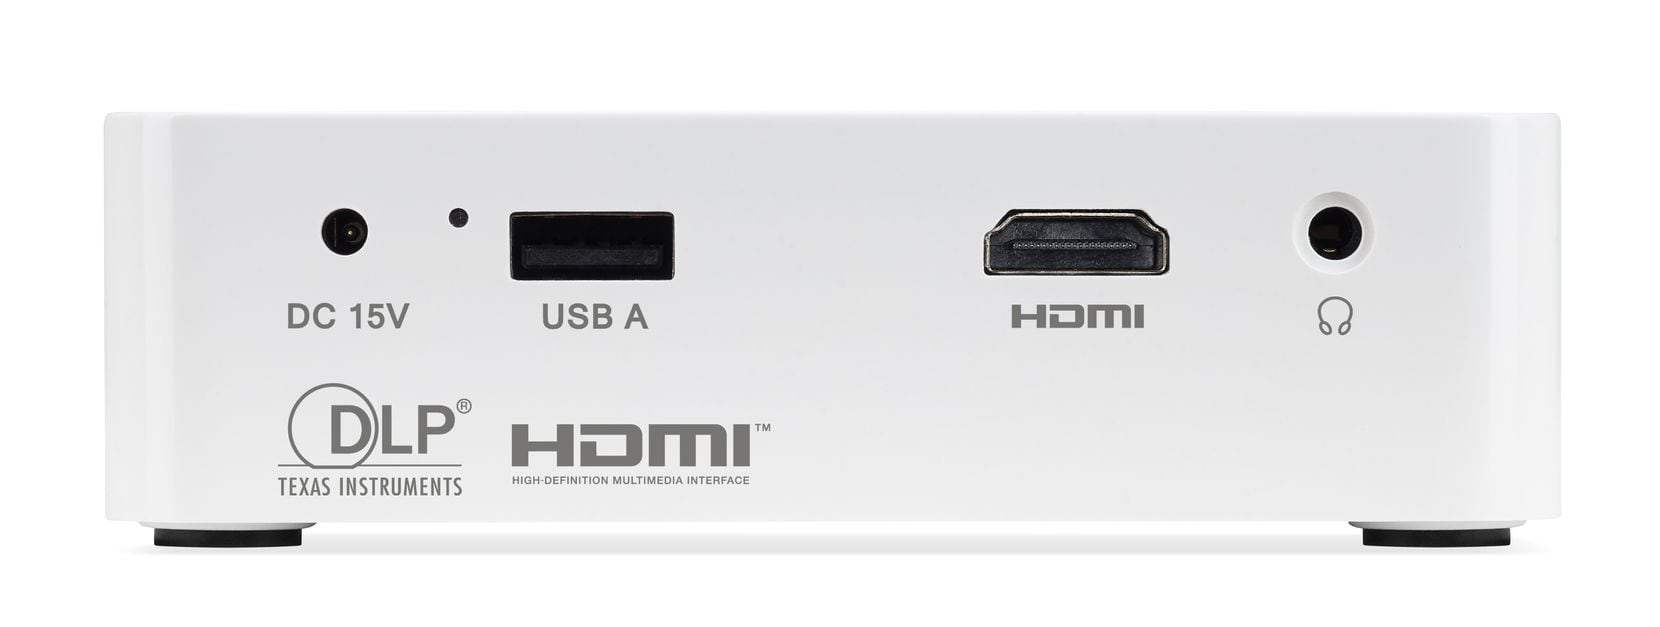 connect acer laptop to projector using hdmi